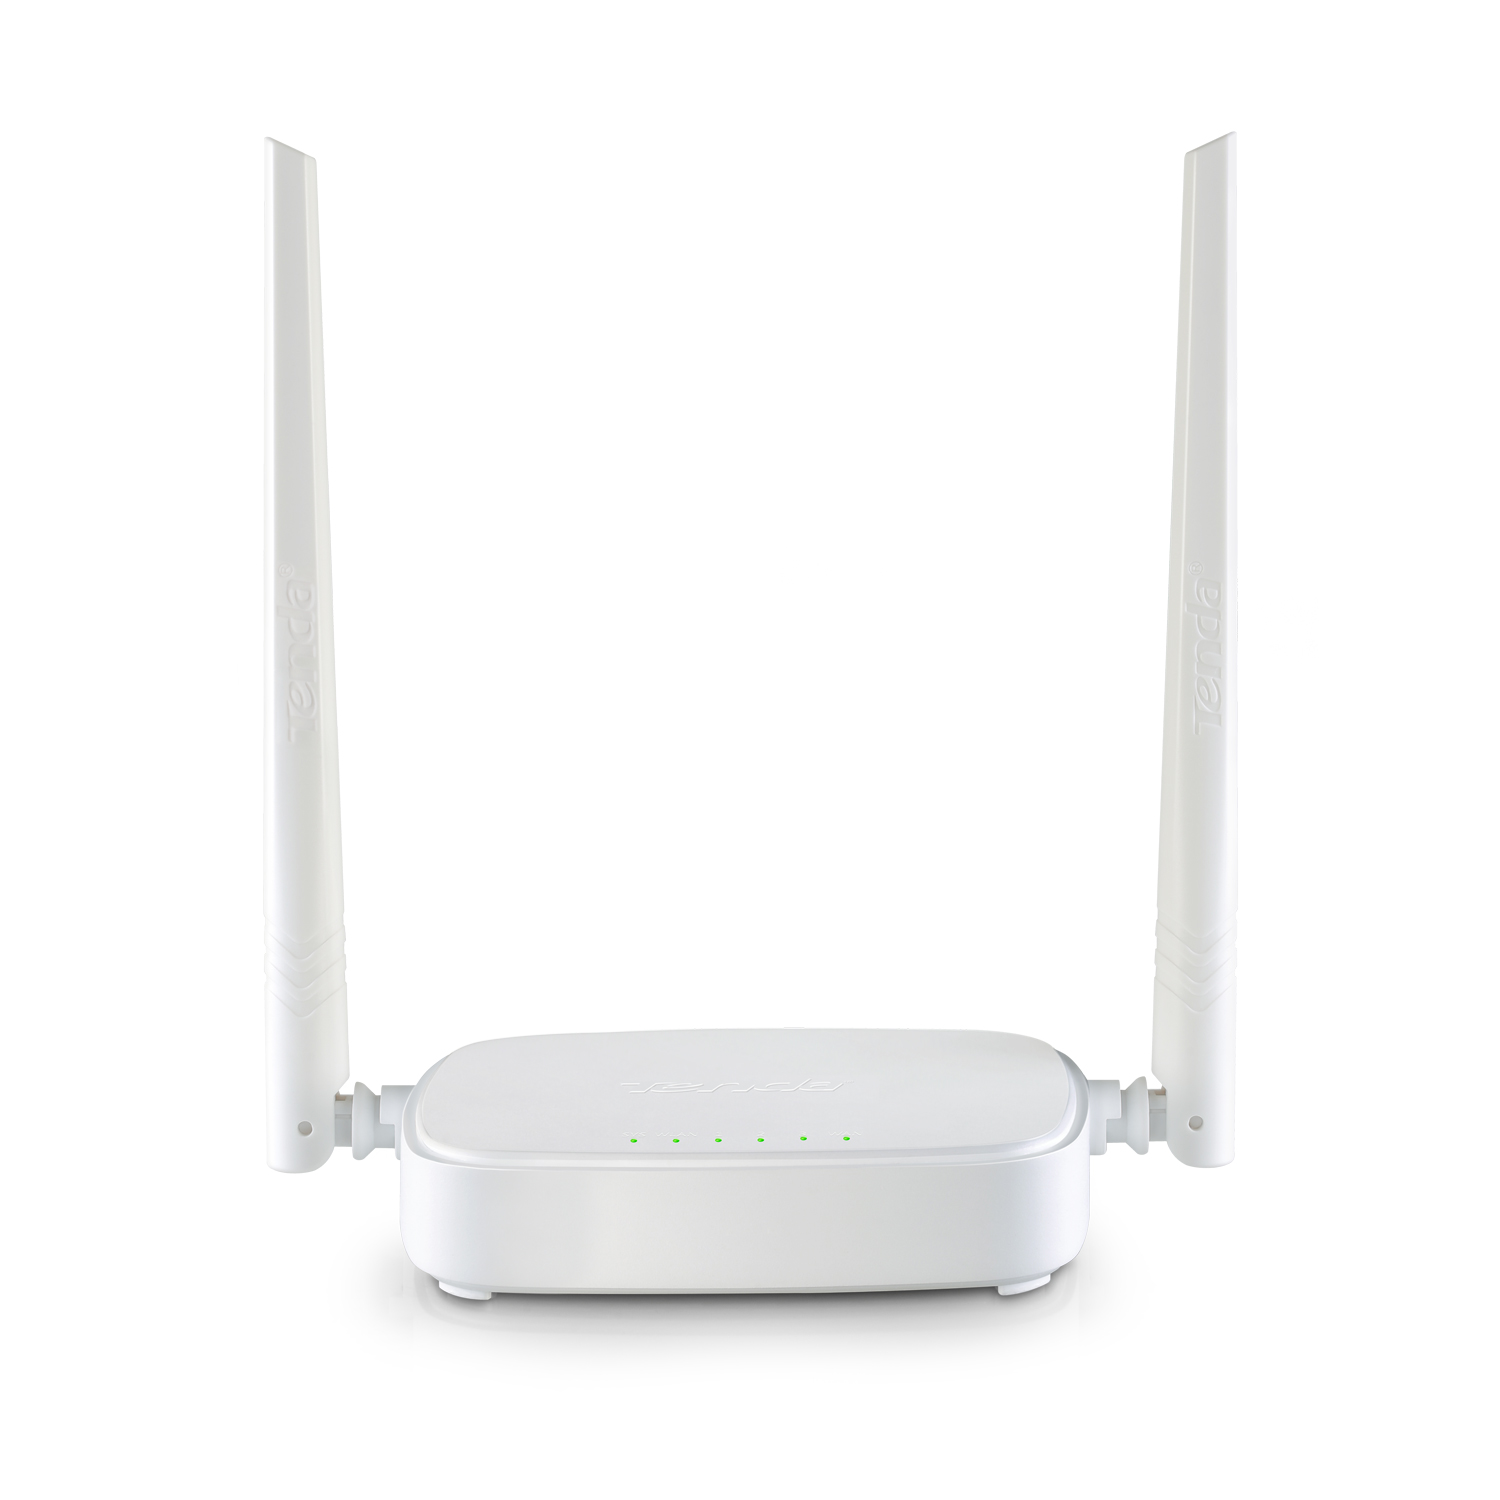 Tenda F3/N301 300Mbps Wireless WiFi Router Wi-Fi Repeater,Multi Language Firmware,Router/WISP/Repeater/AP Mode,1WAN+3LAN RJ45 Ports รุ่น F3 รับประกันศูนย์ 5 ปี